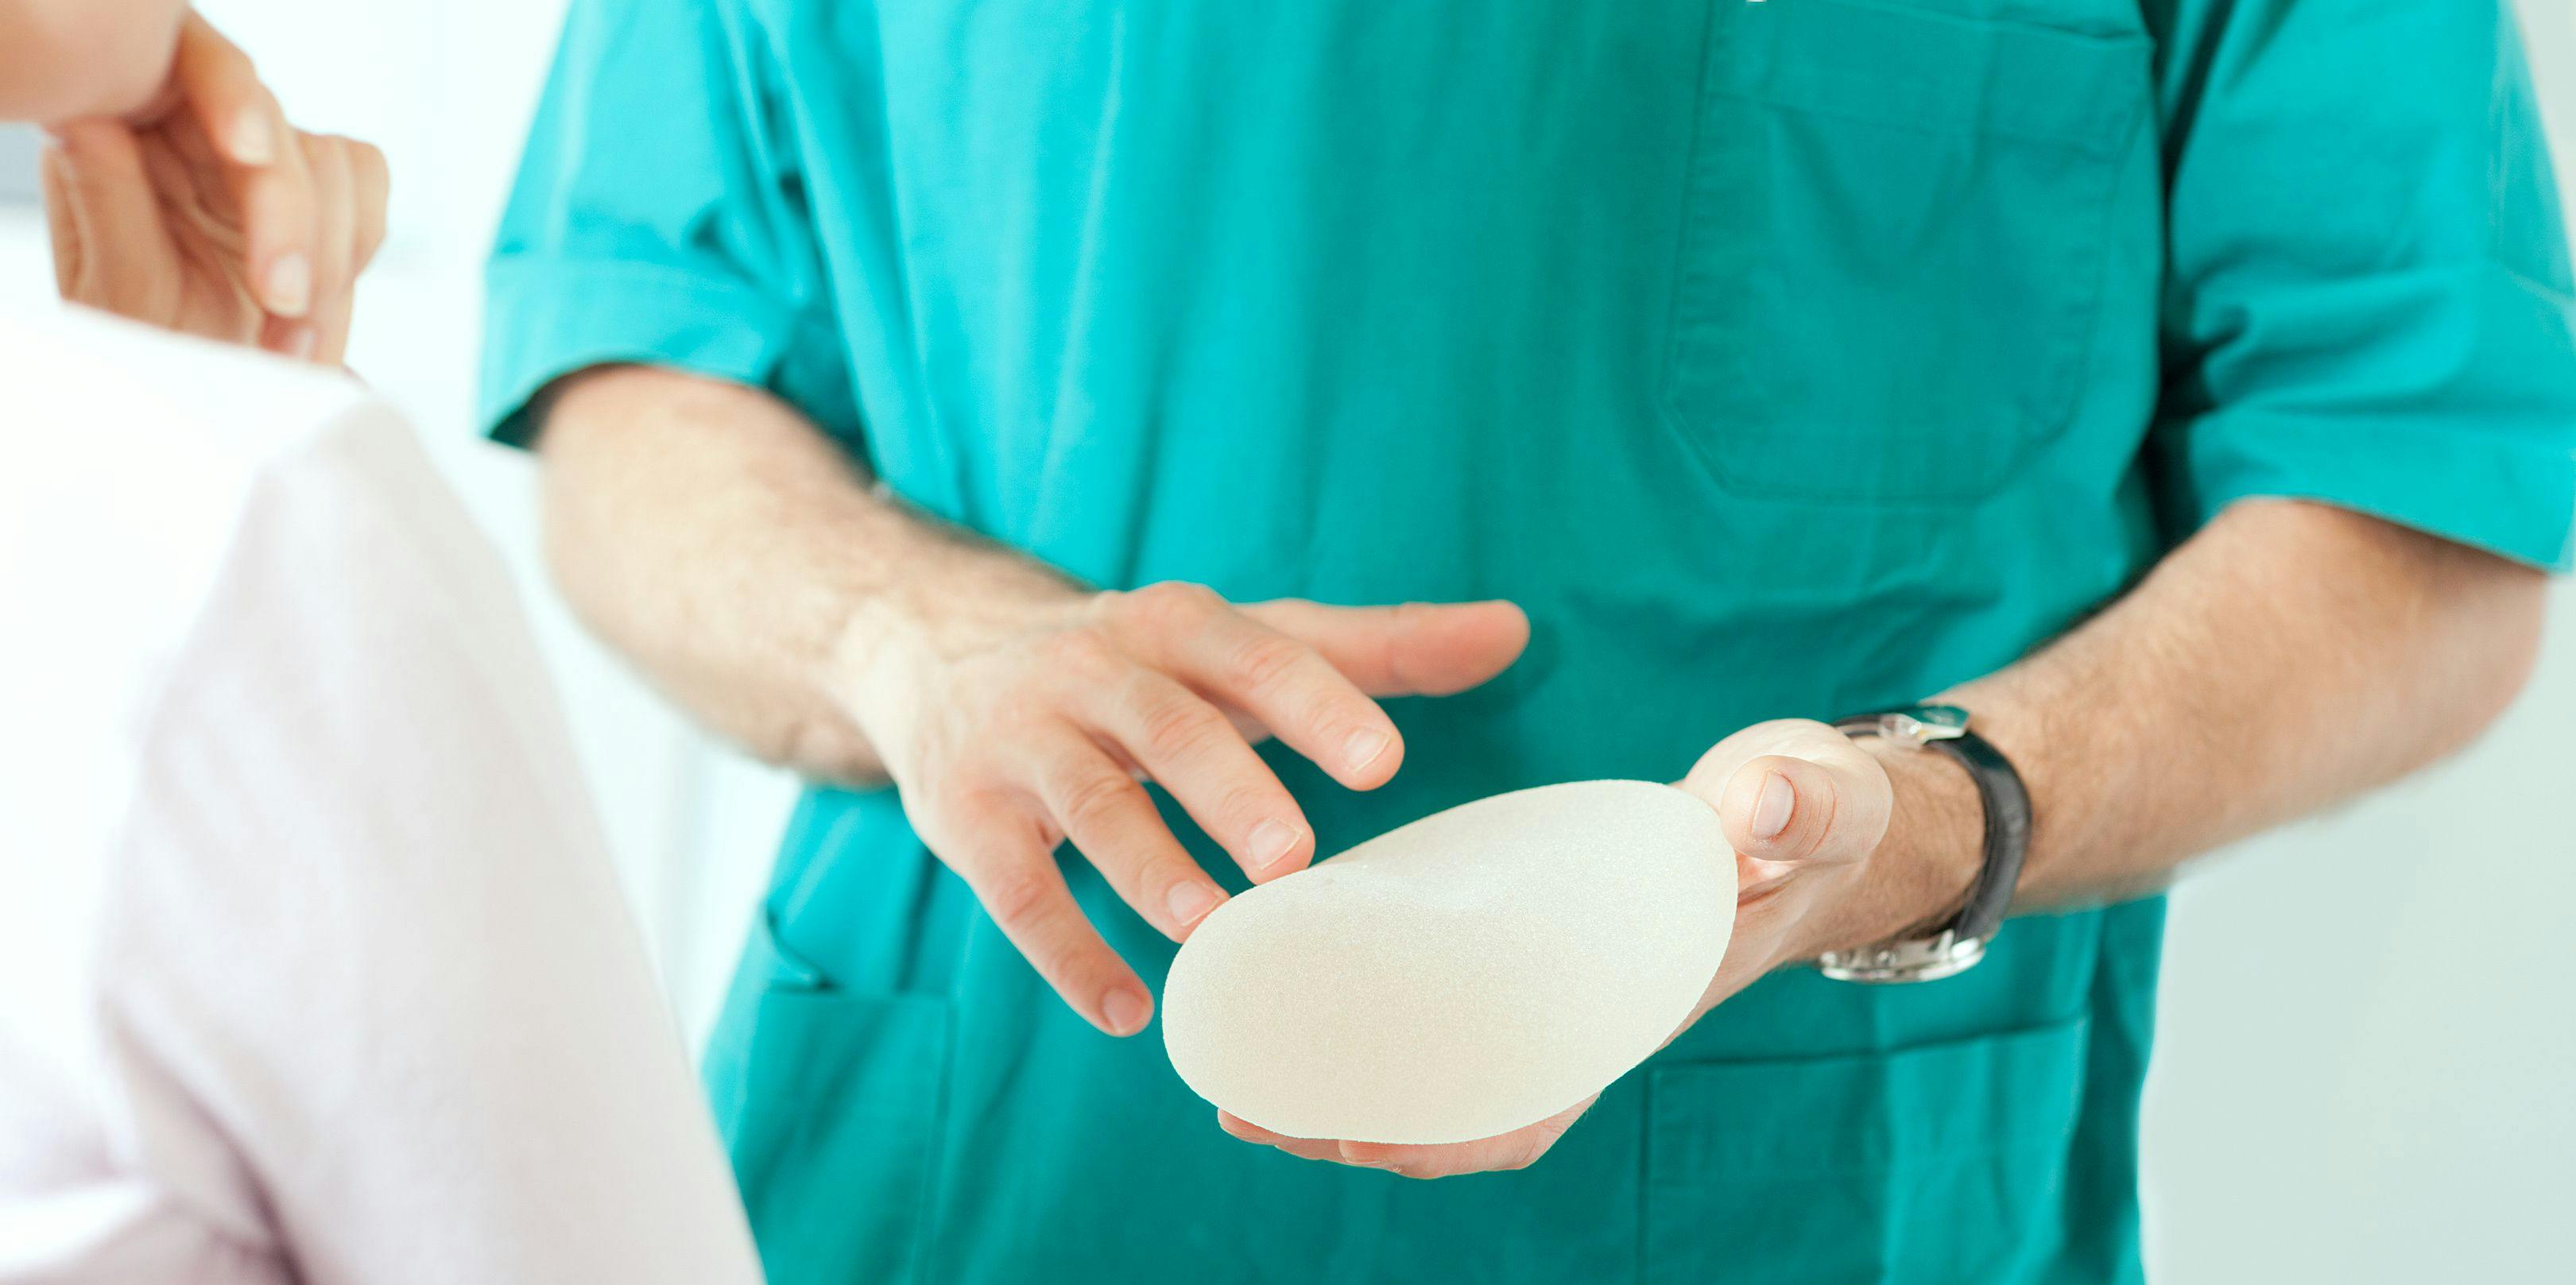 FDA Approves Allergan's New-Sized Breast Implants